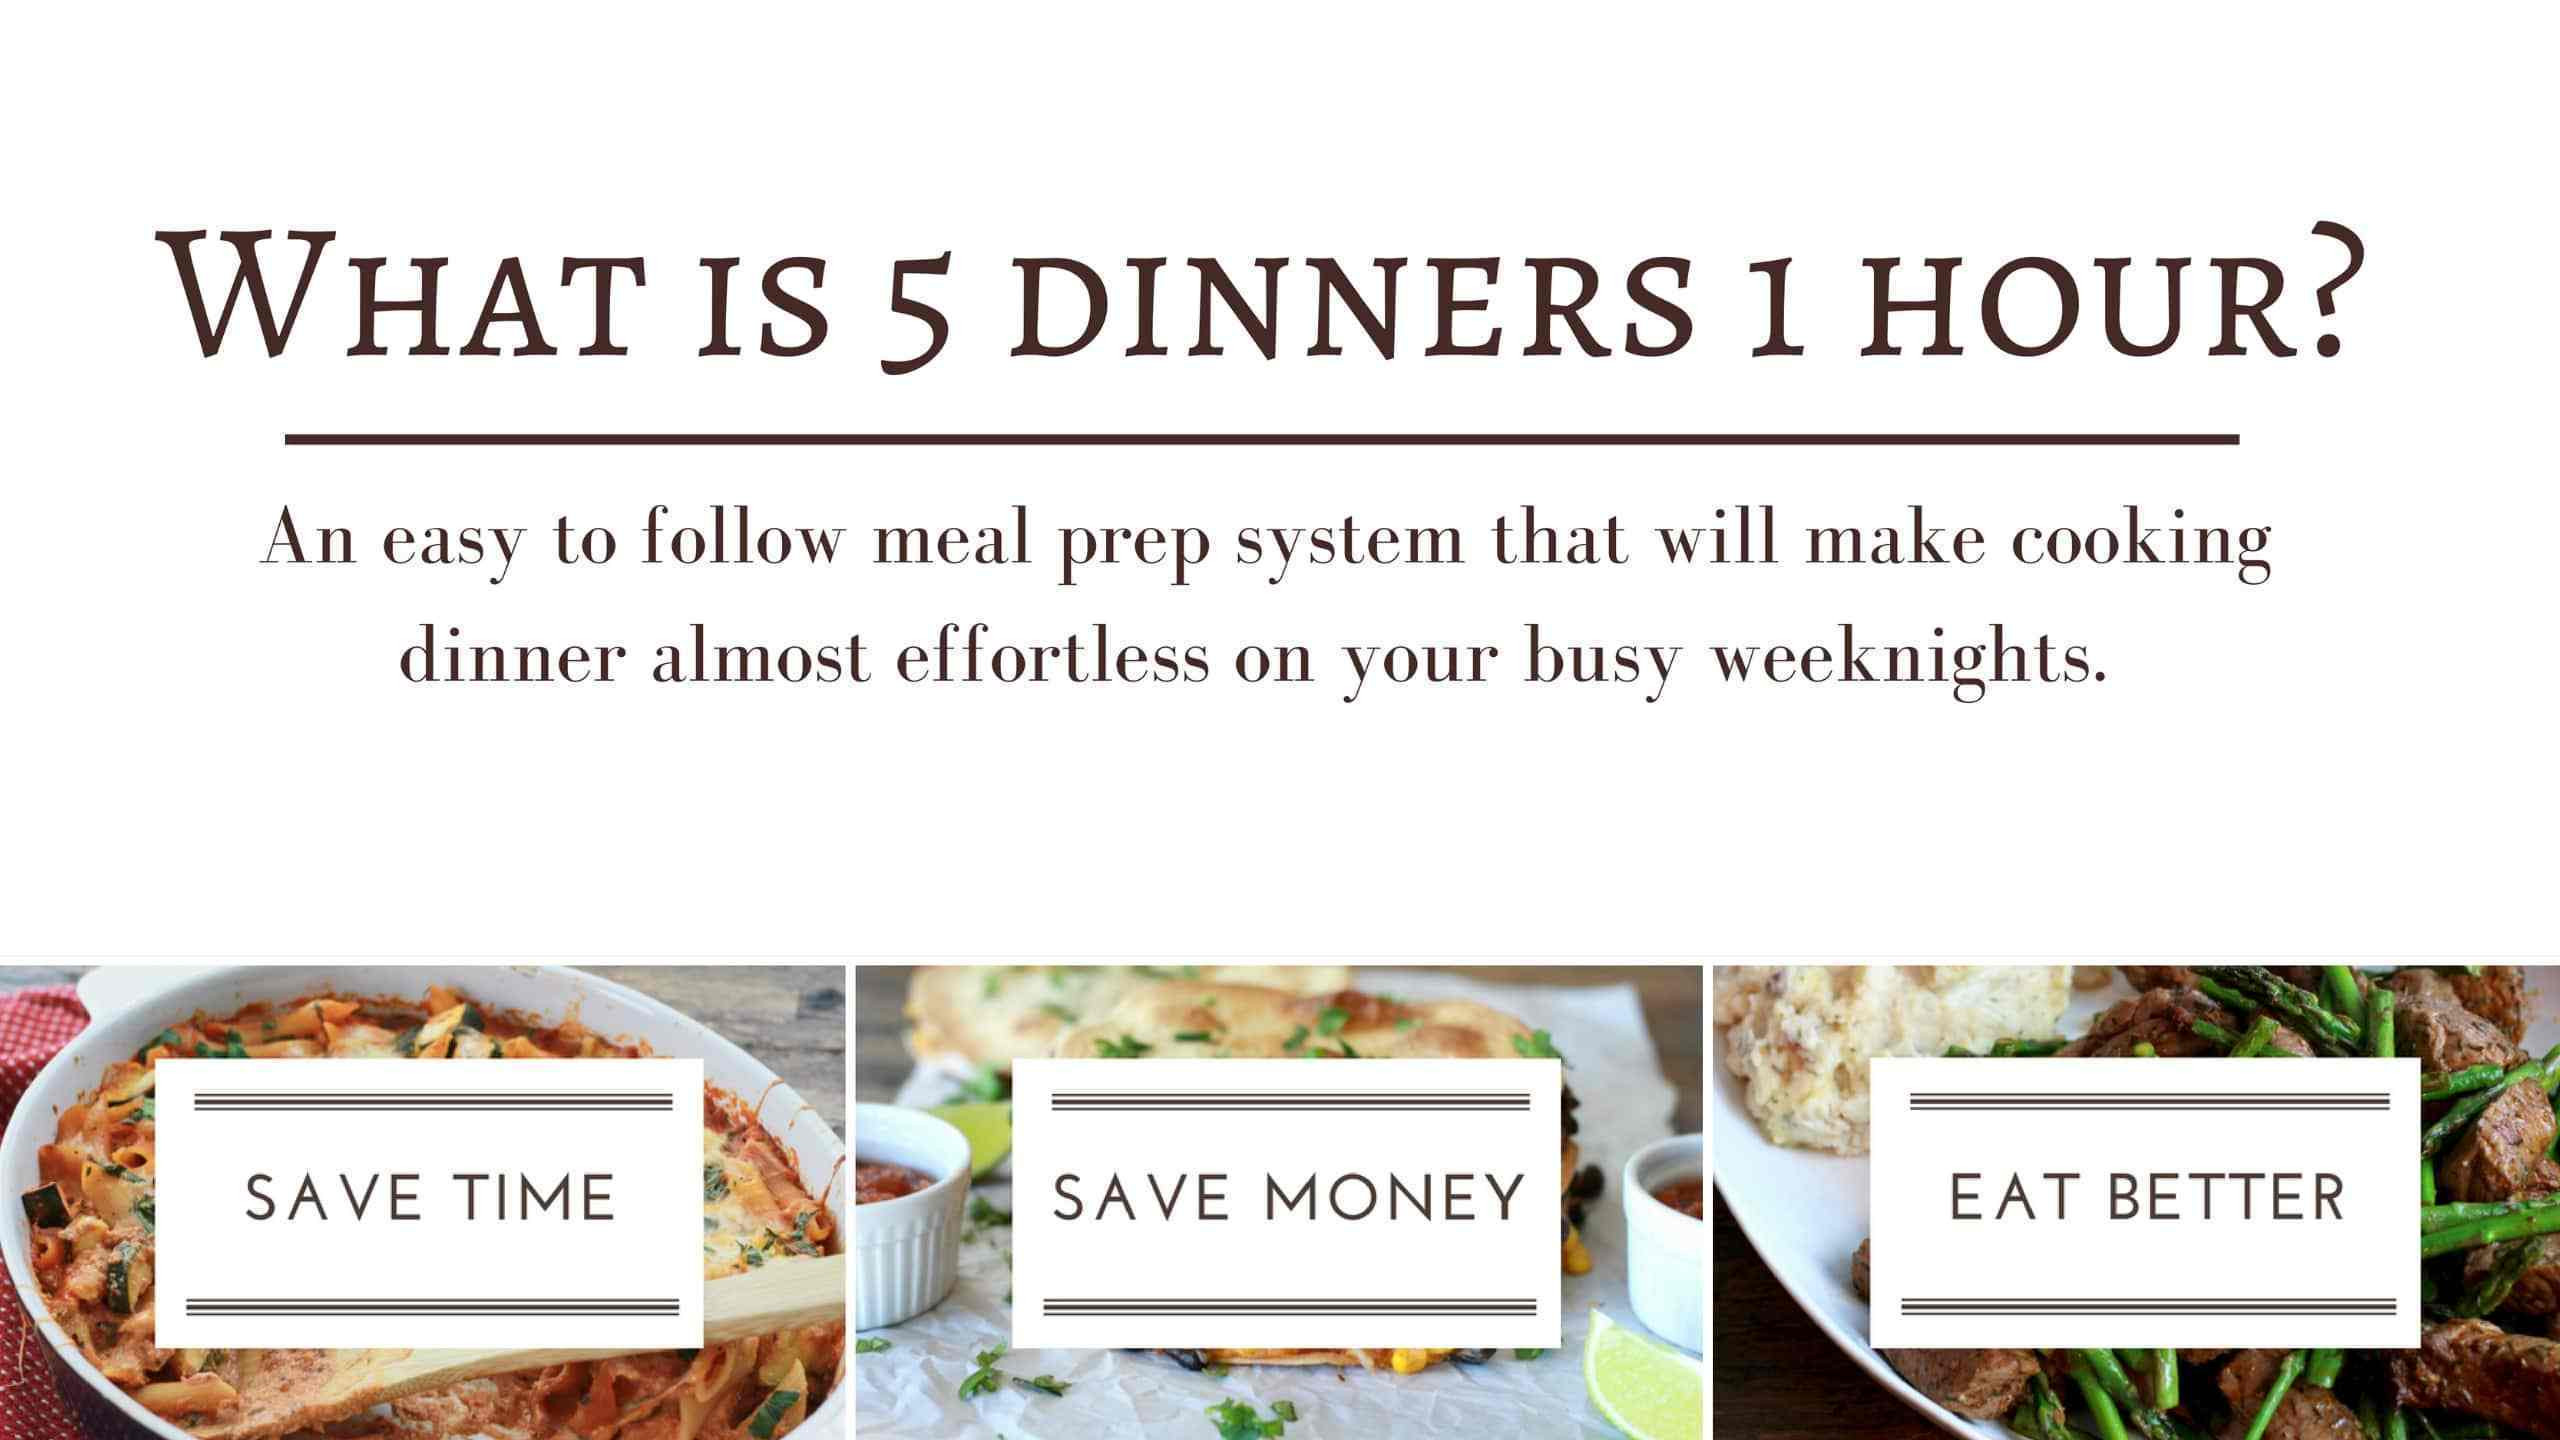 5 Dinners 1 Hour
 5 Dinners In 1 Hour The meal planning system that saves